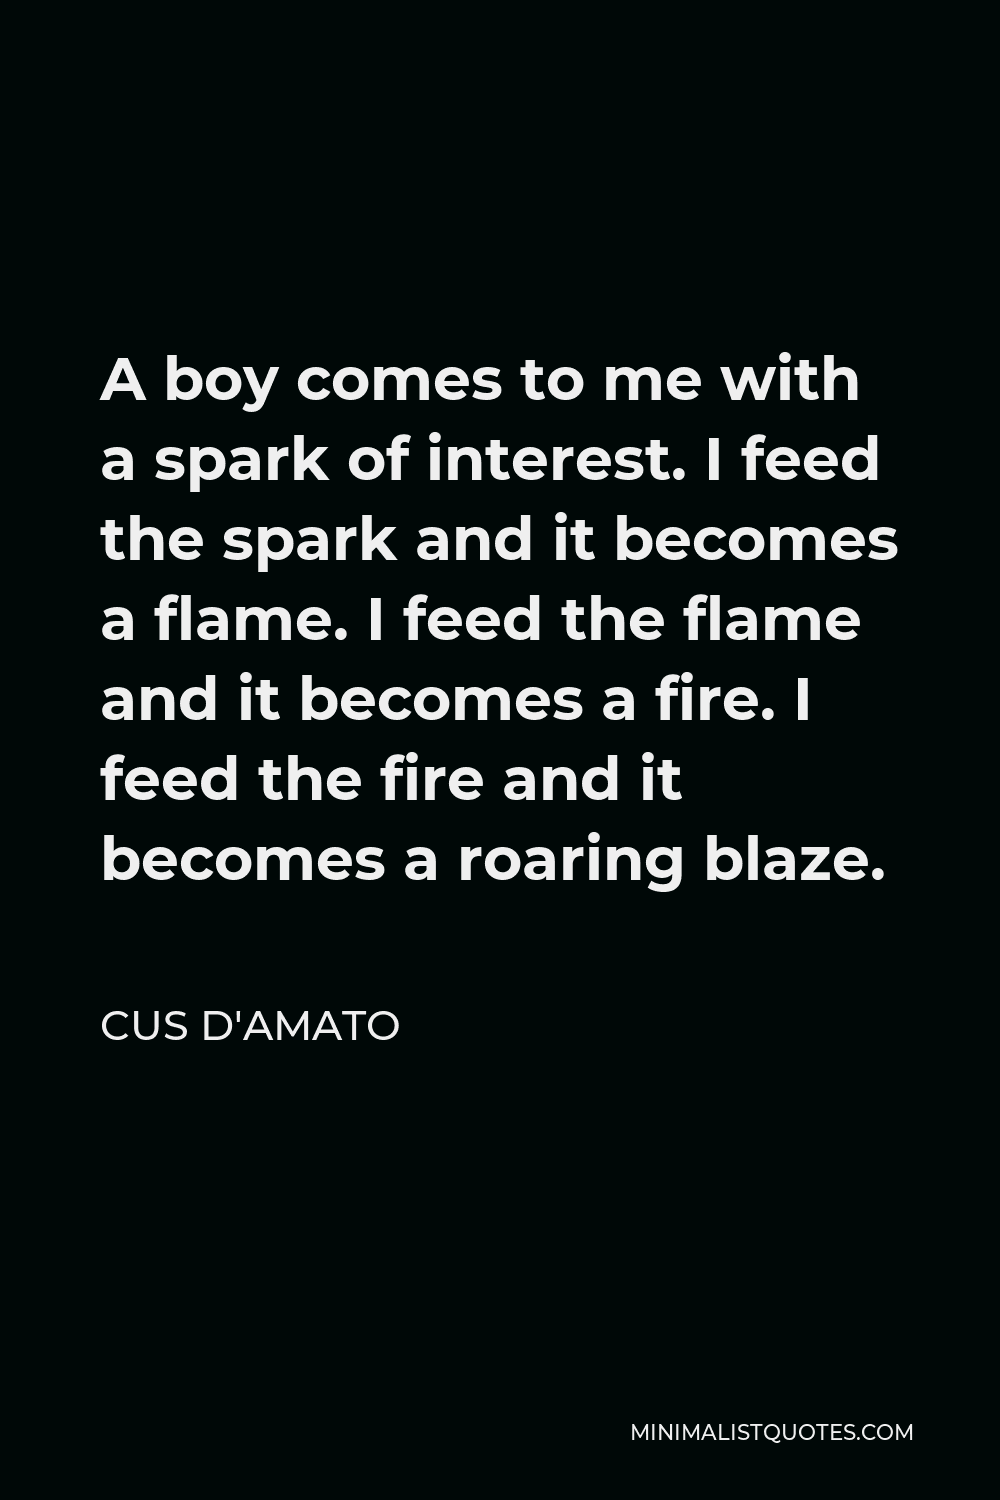 Cus D'Amato Quote: A boy comes to me with a spark of interest. I